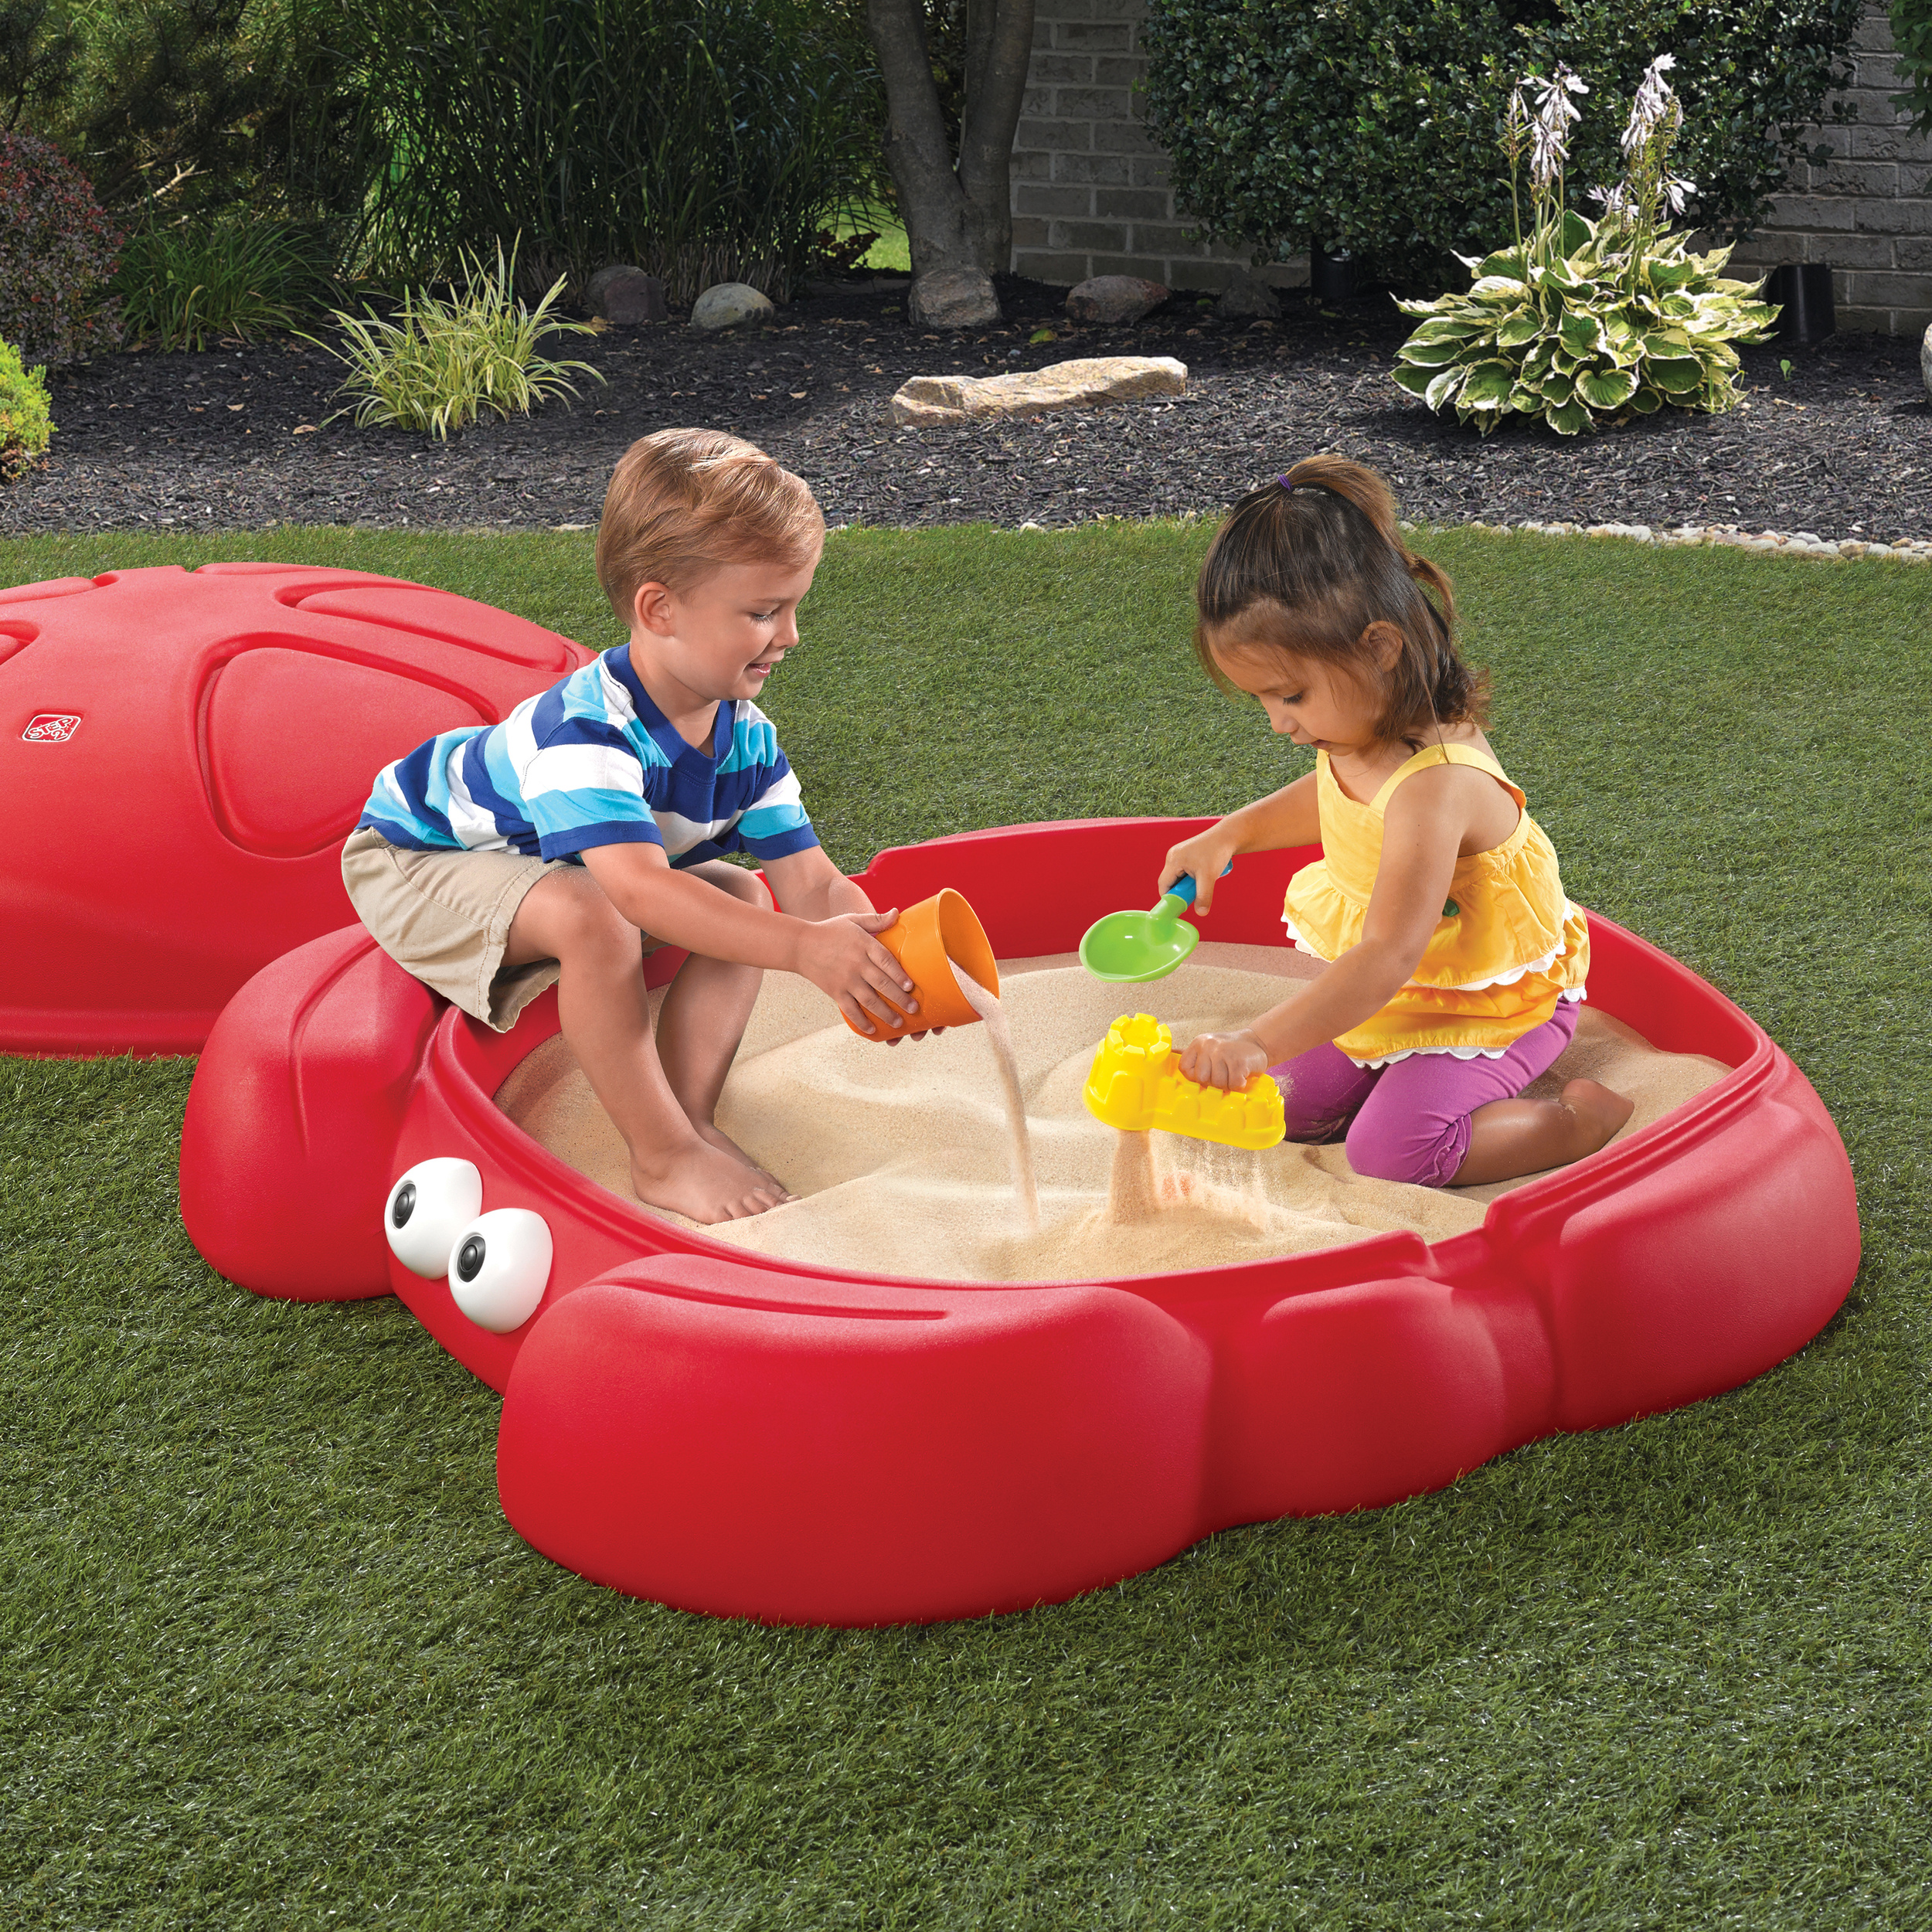 Step2 Crabbie Sandbox Red Plastic Outdoor Sandbox with Cover for Kids - image 5 of 6